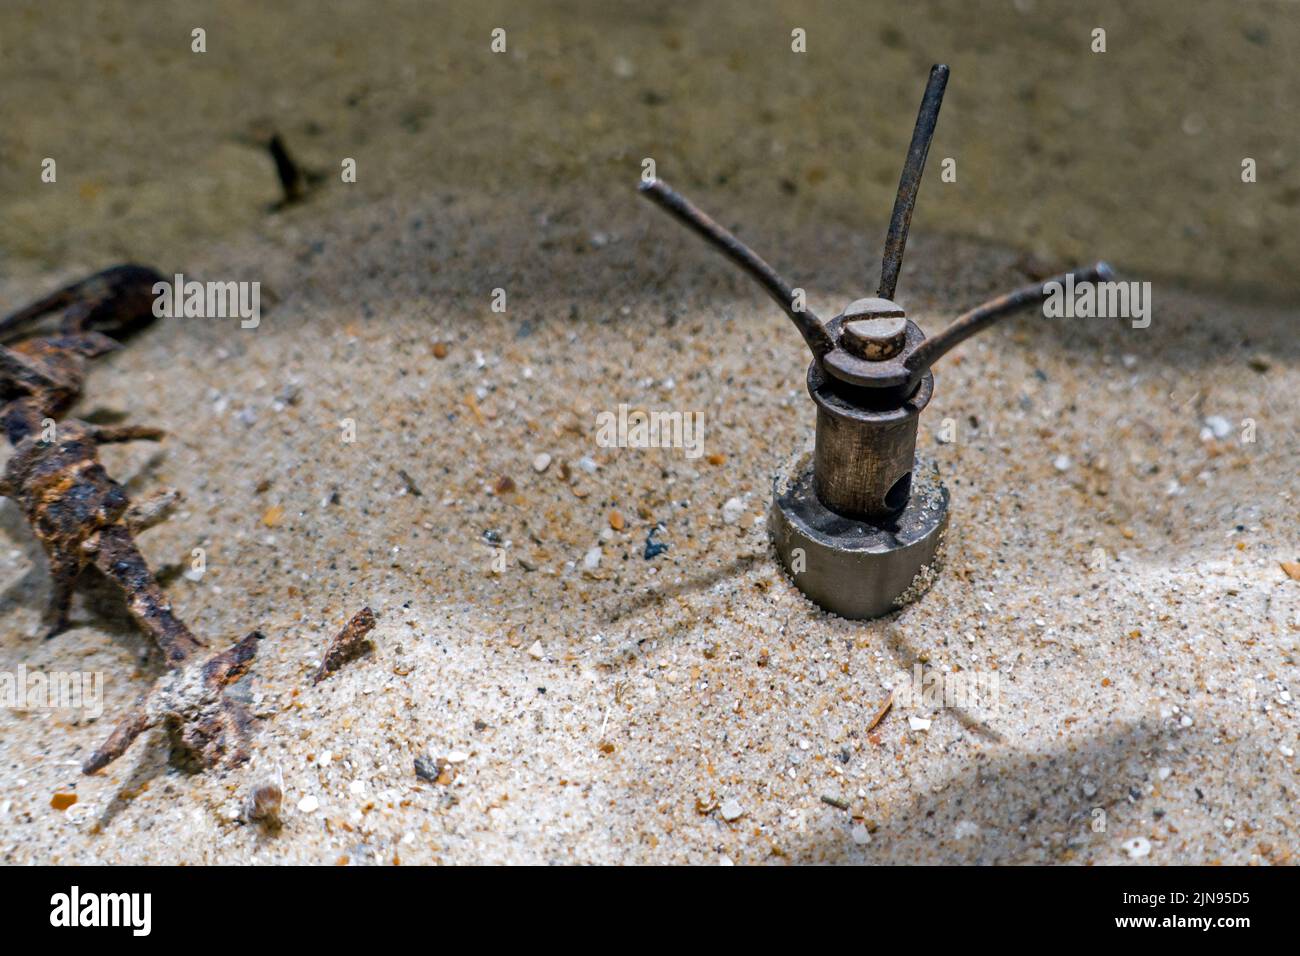 WW2 German S-mine / Bouncing Betty / WWII springmine, World War Two bounding anti-personnel mine showing prongs sticking out from sea sand on beach Stock Photo